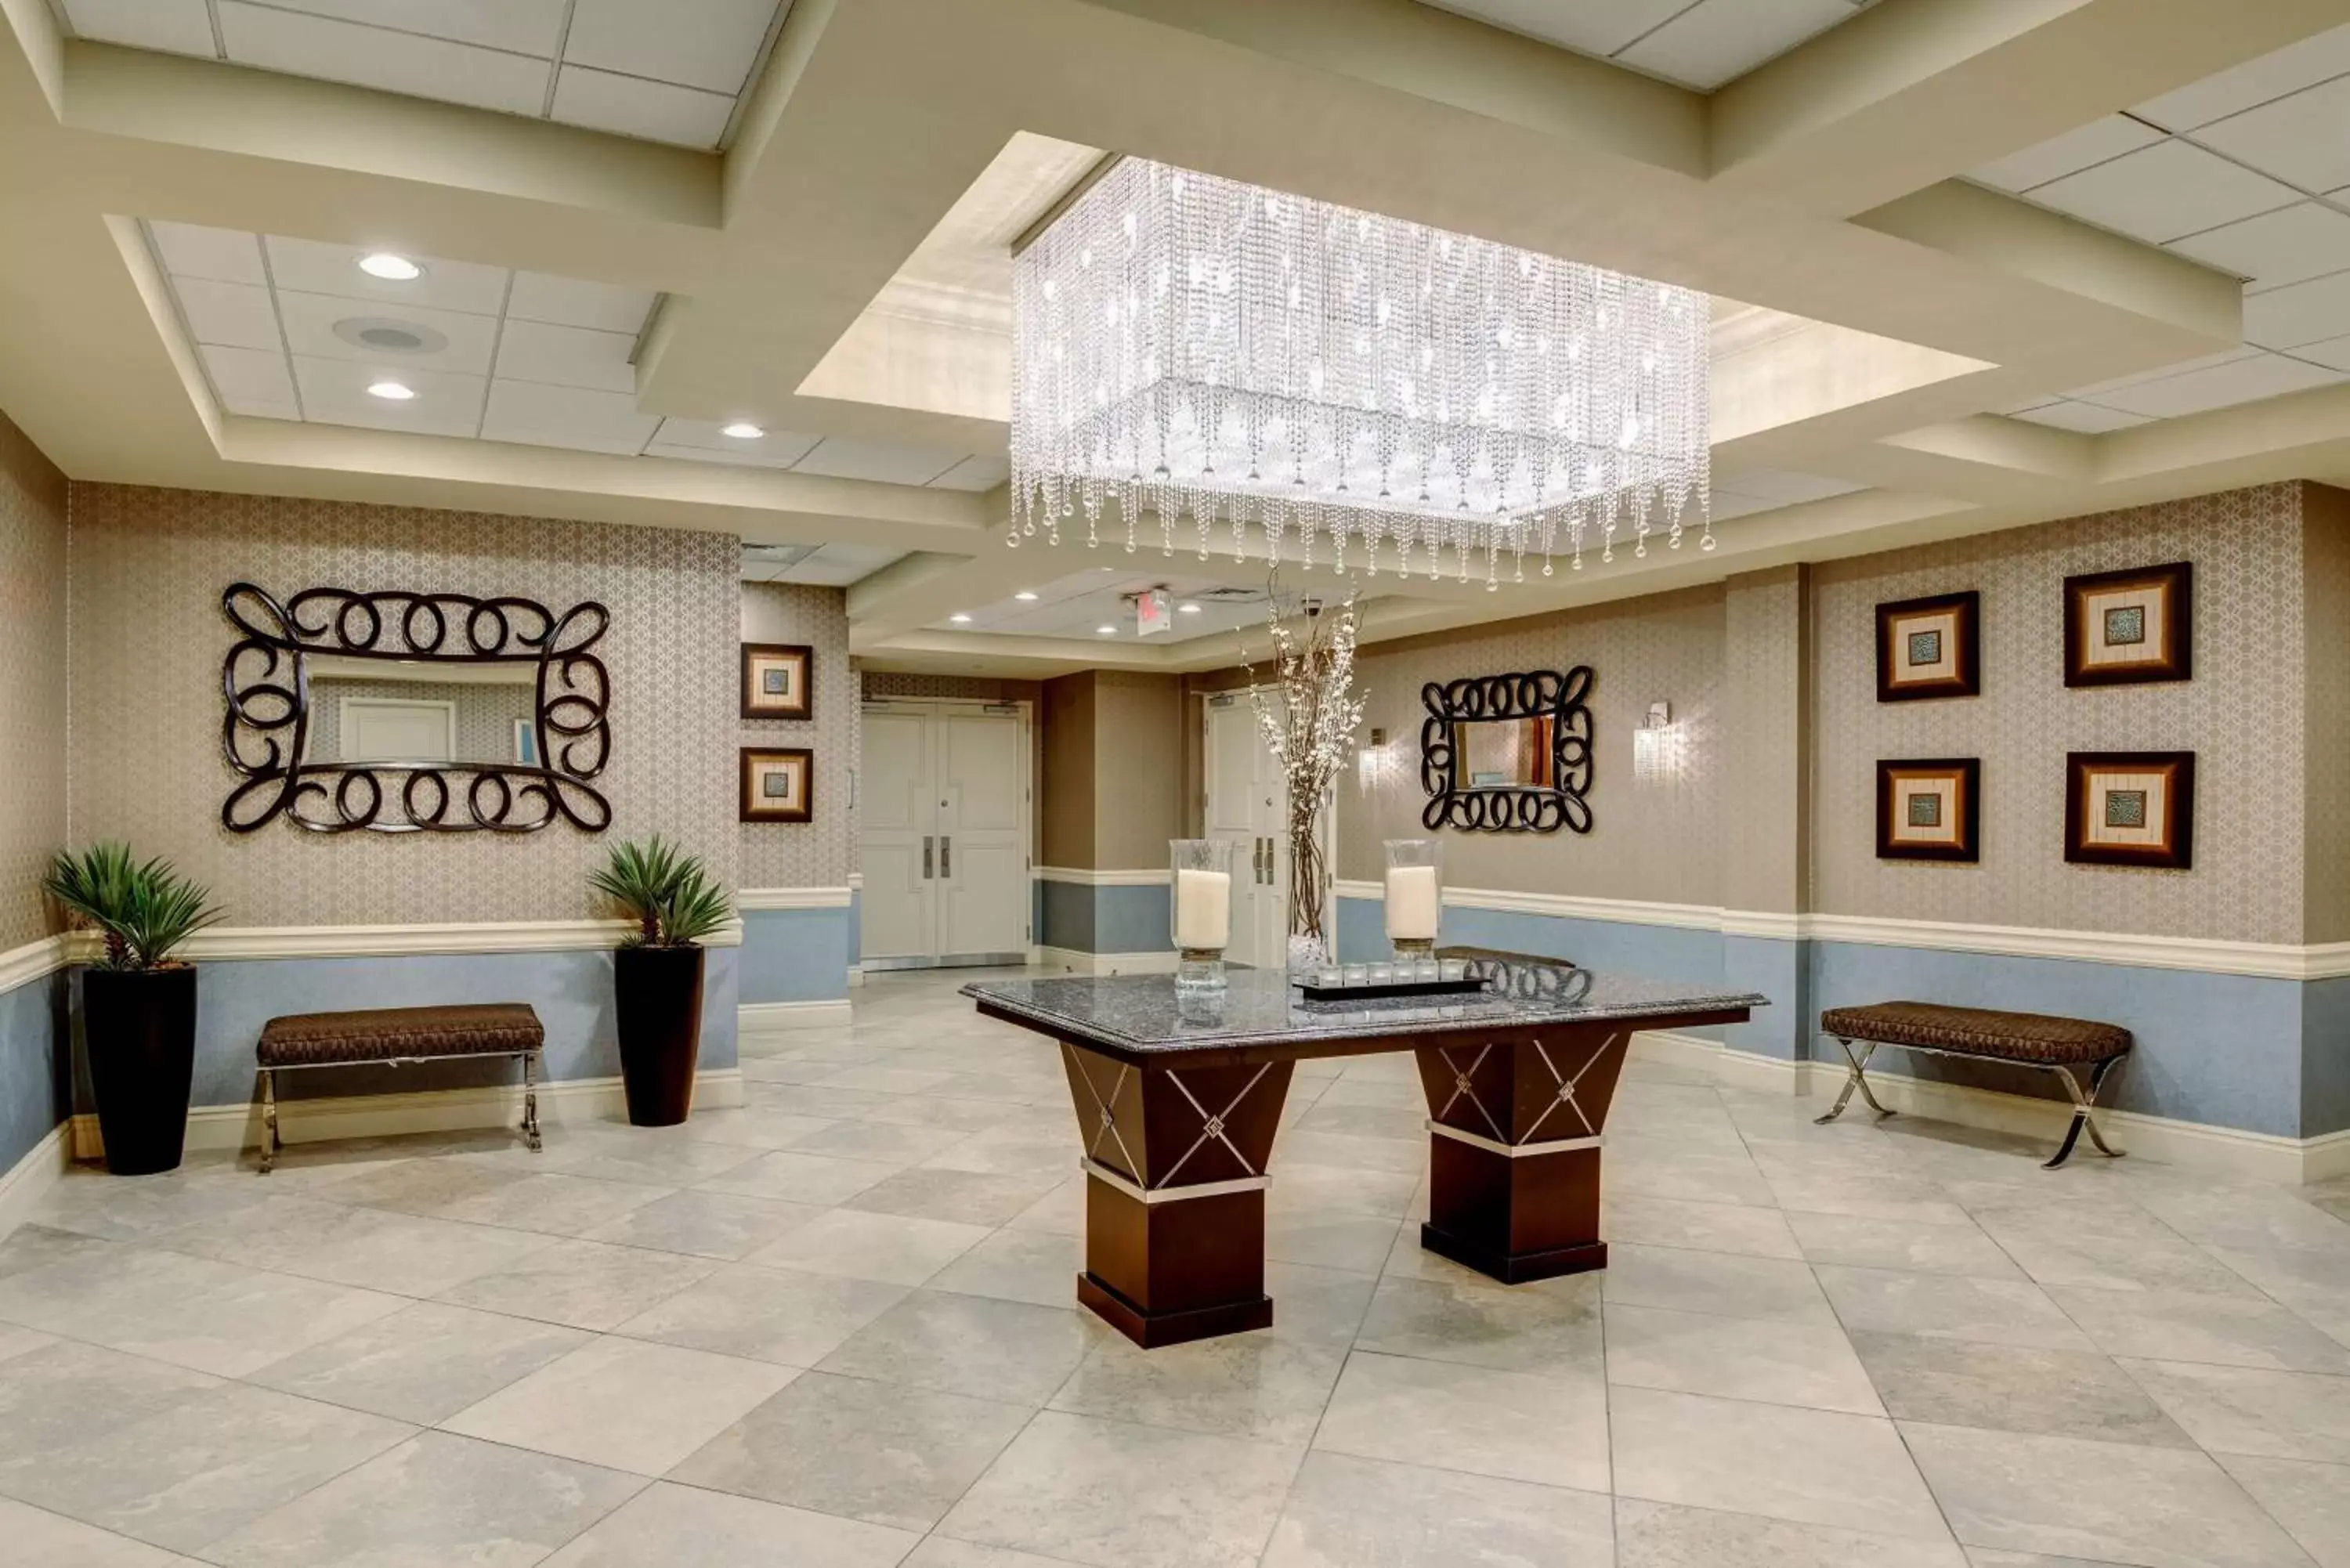 Meeting/conference room in DoubleTree by Hilton Tinton Falls-Eatontown